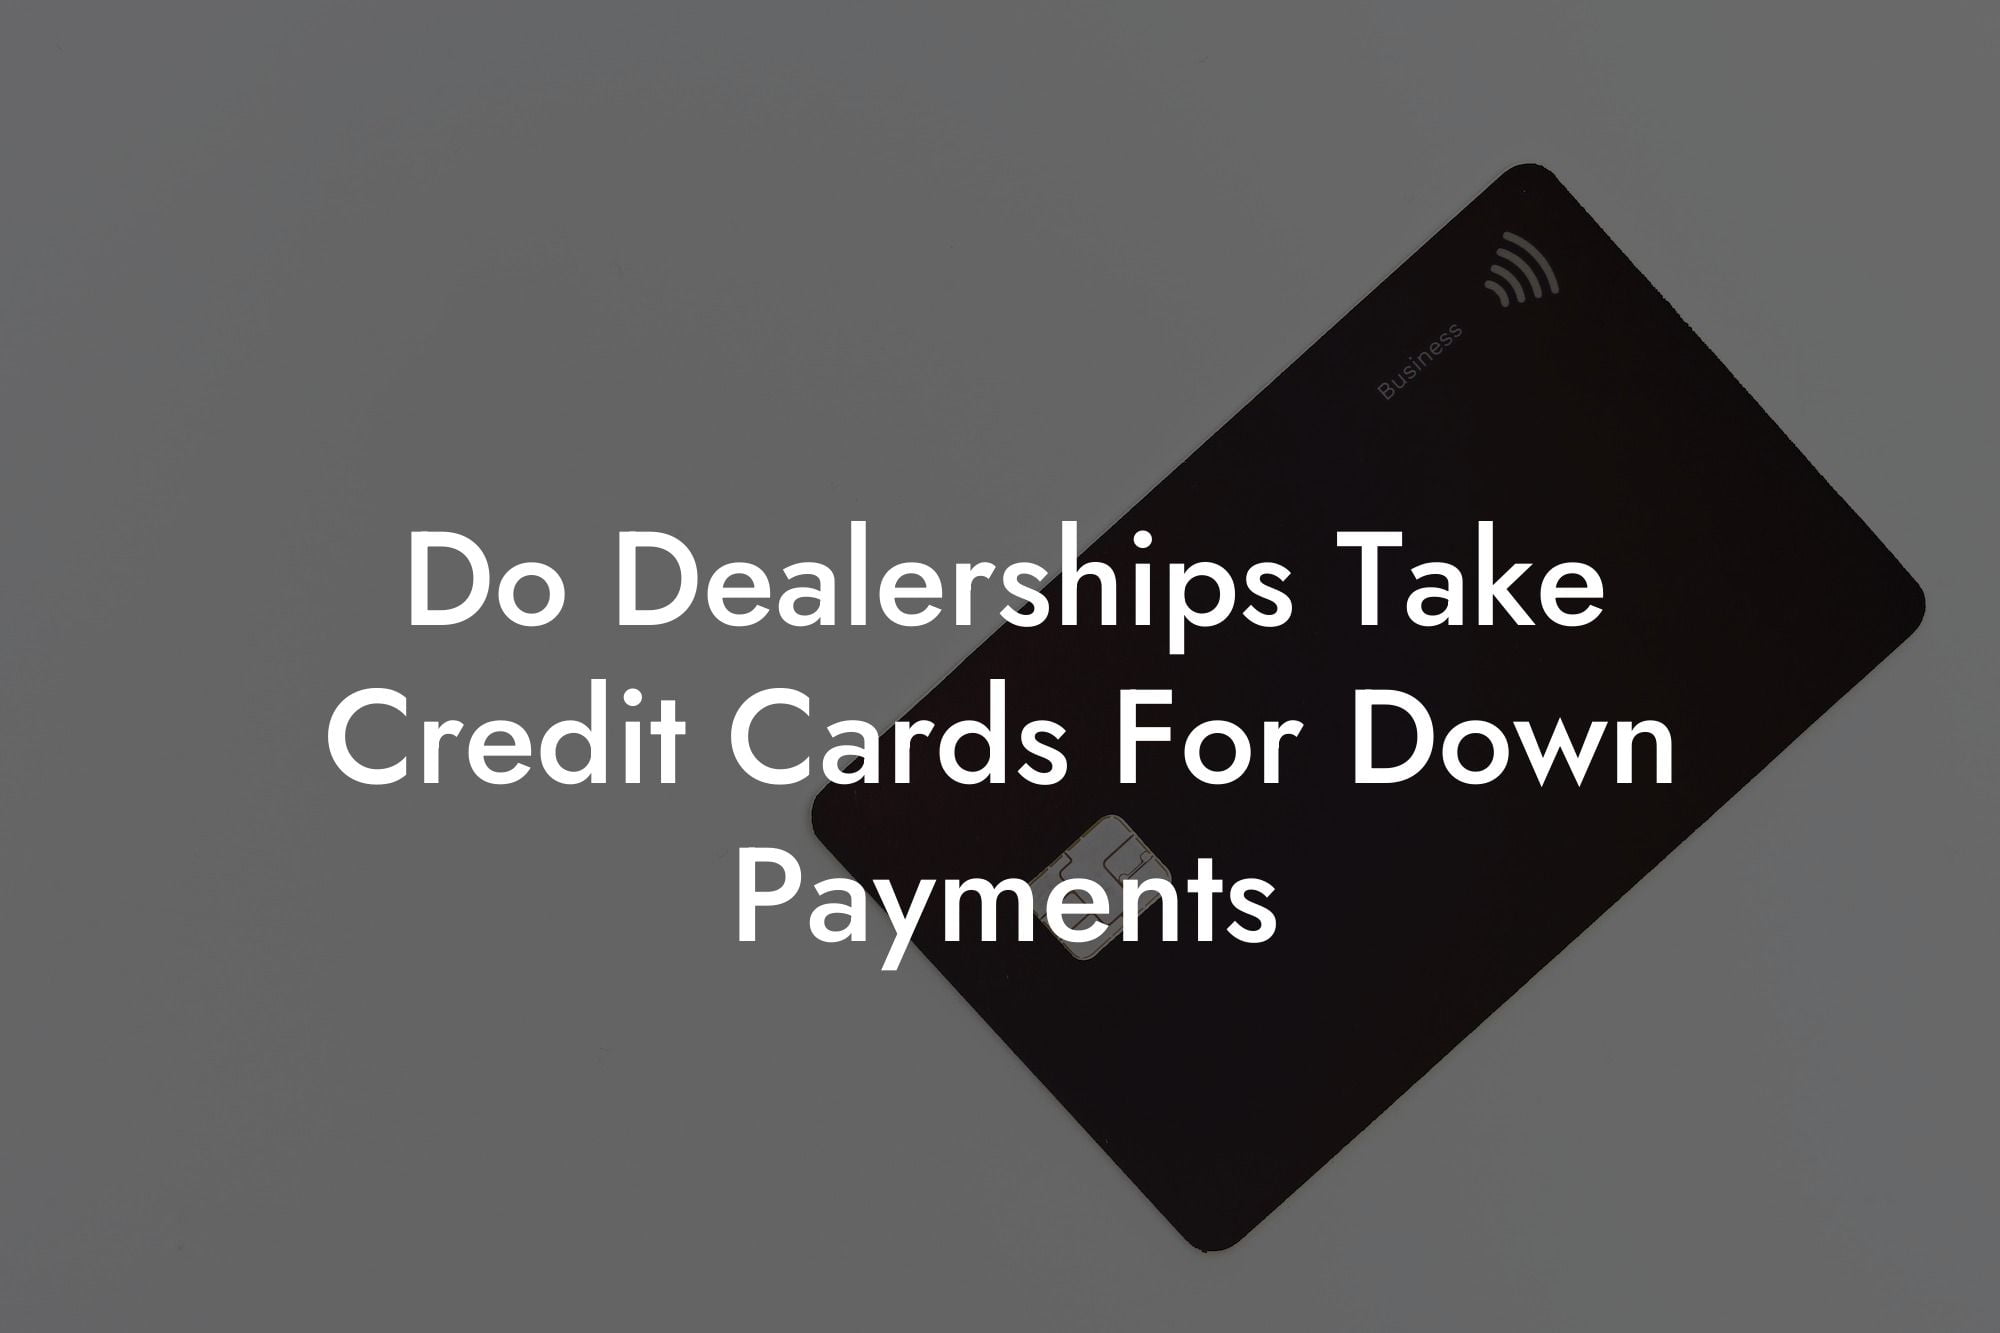 Do Dealerships Take Credit Cards For Down Payments